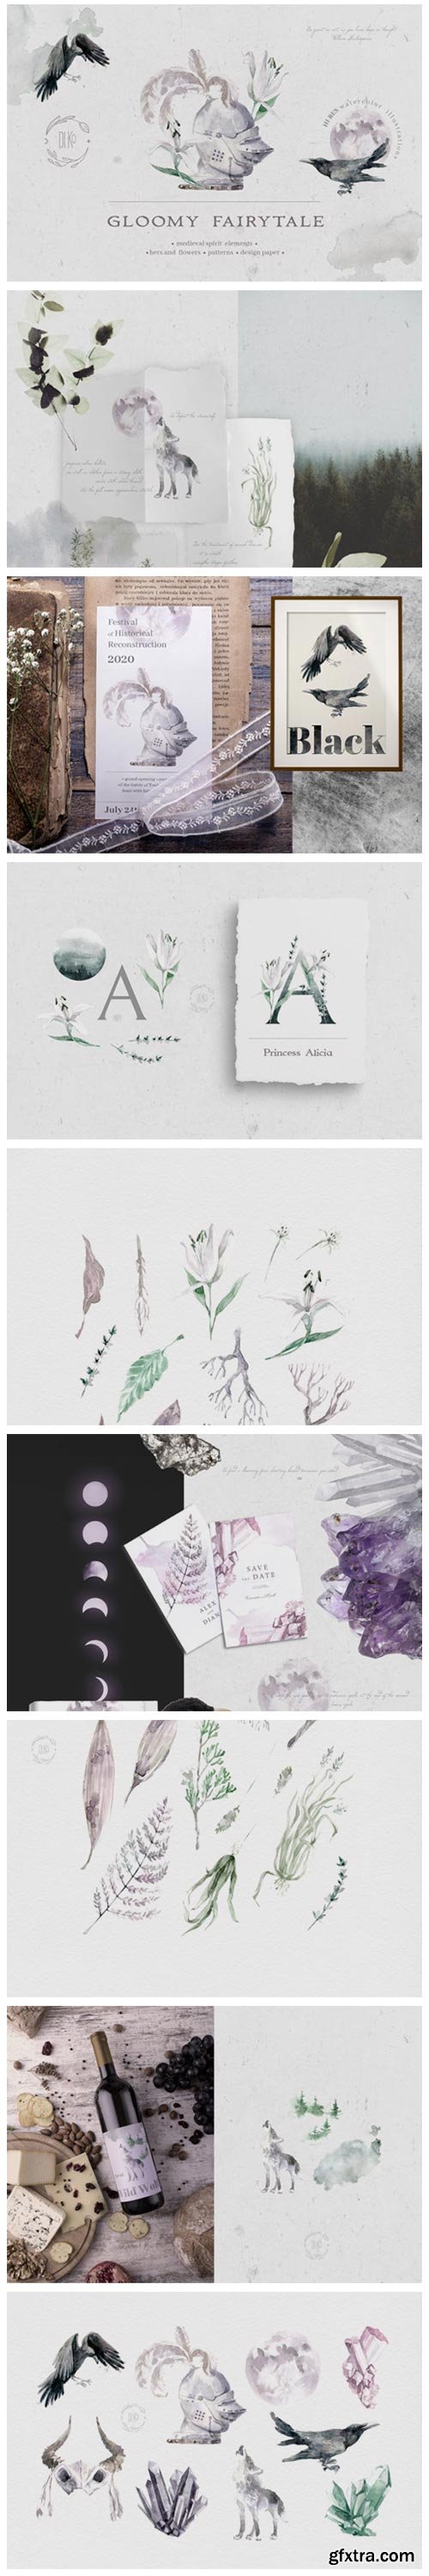 Gloomy Fairytale Graphic Collection 2915402